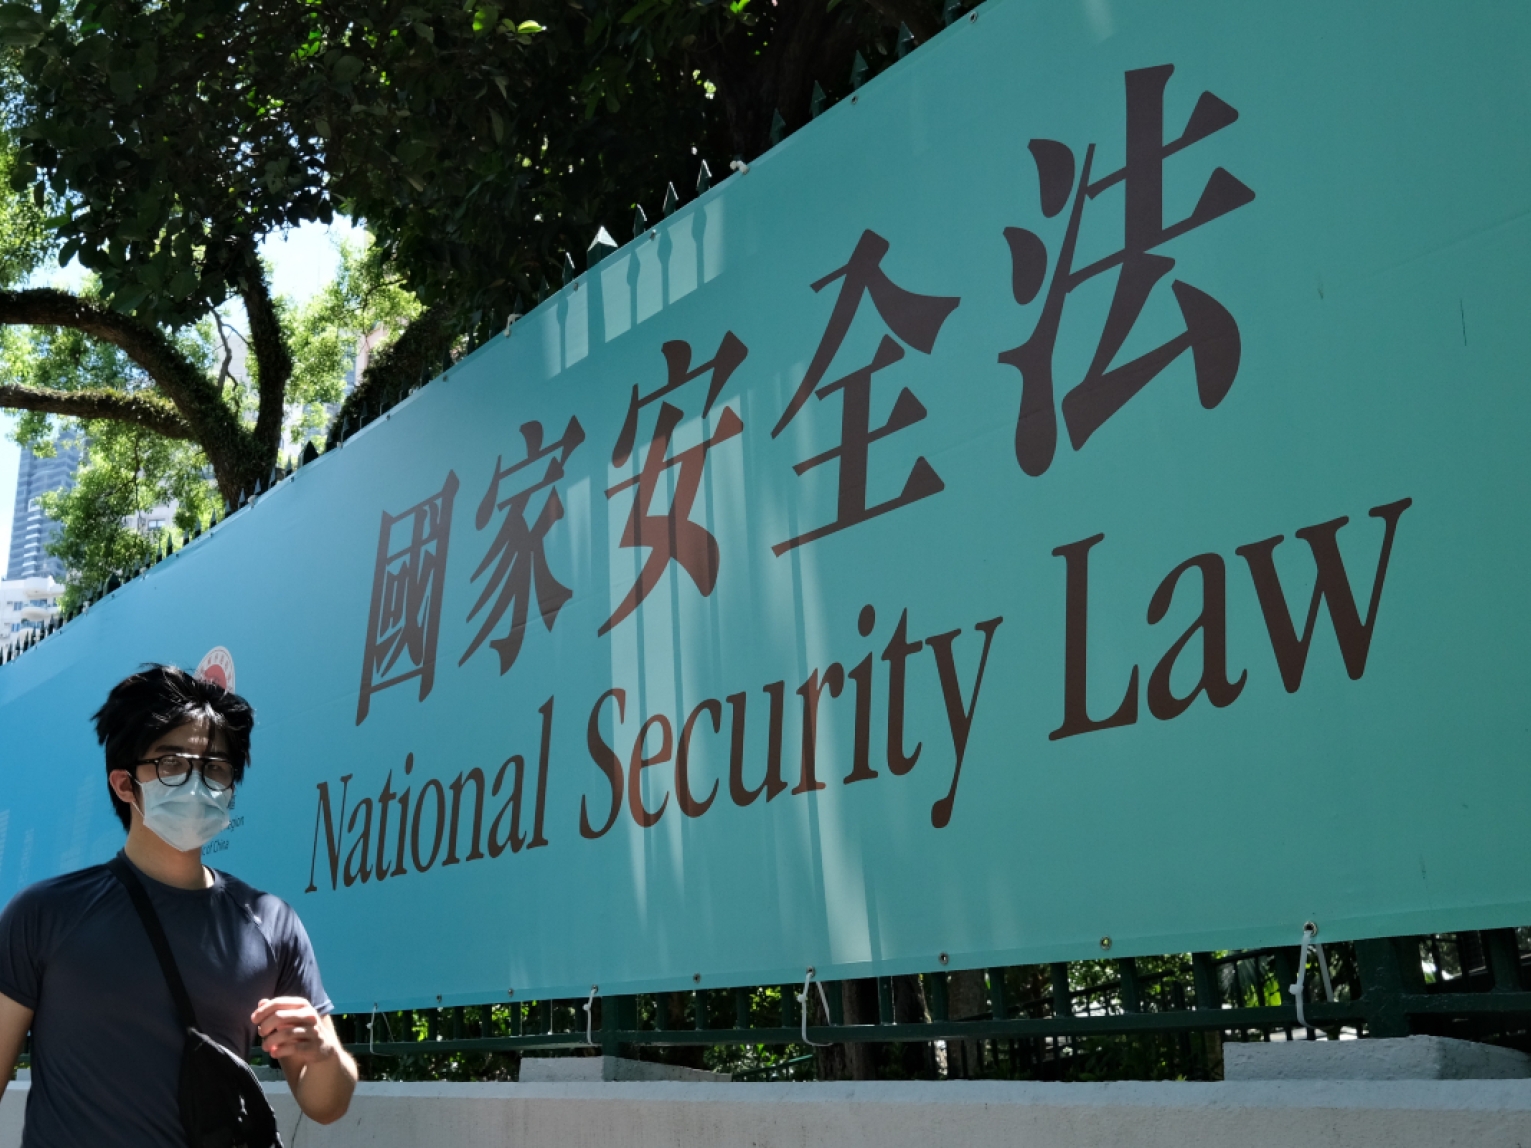 A new national security law for Hong Kong has roiled politics in the territory